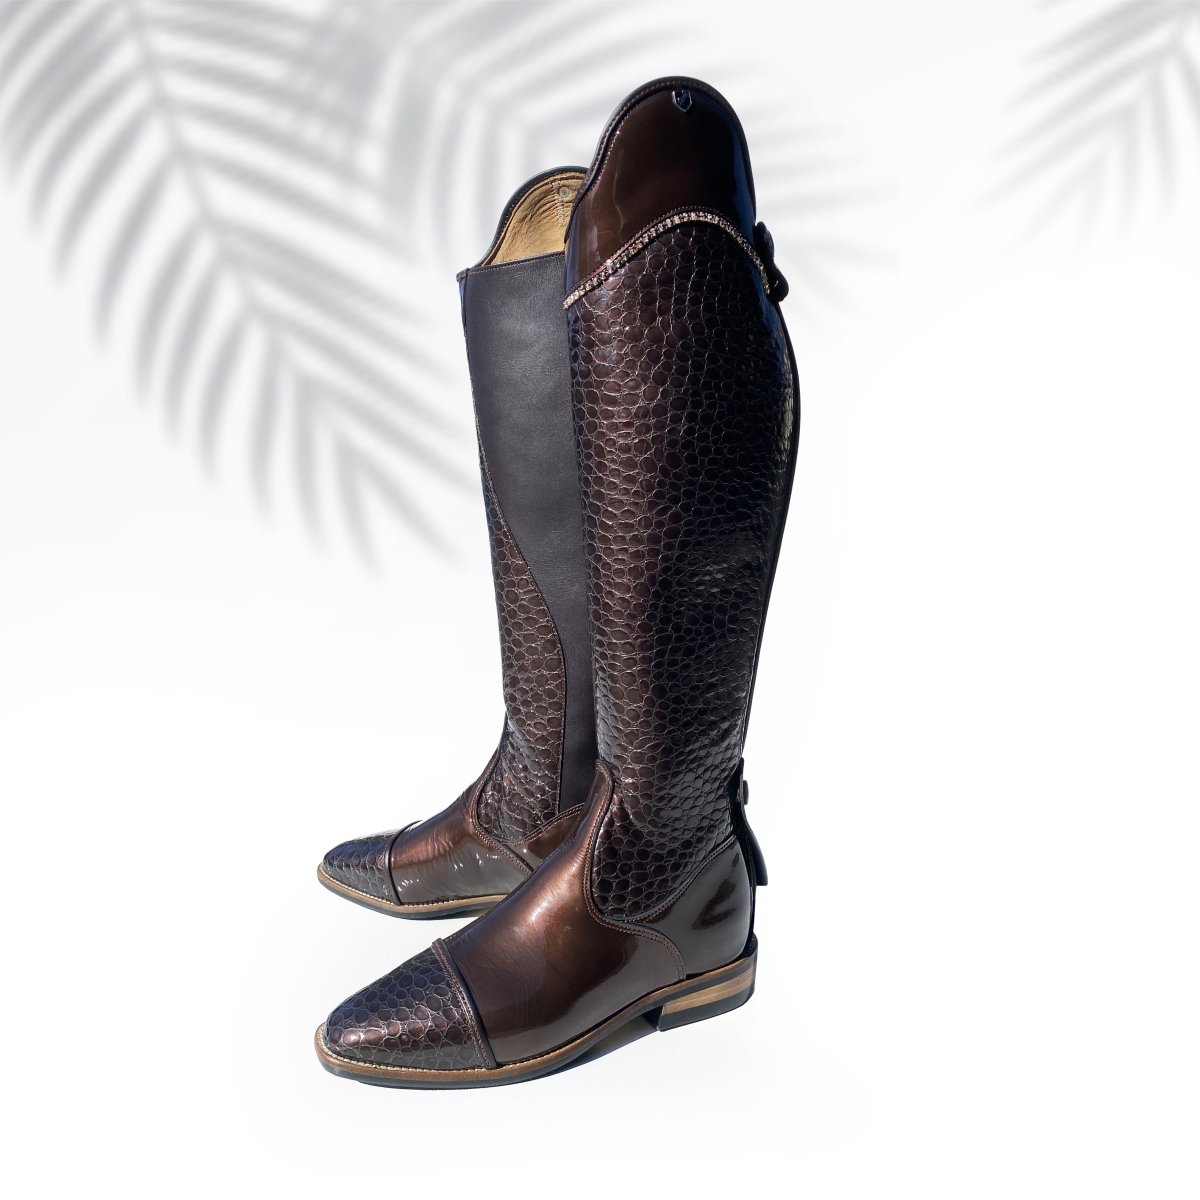 Classic tall dressage boot with rose-gold Swarovski accent rose gold zipper in shiny patent croco-leather